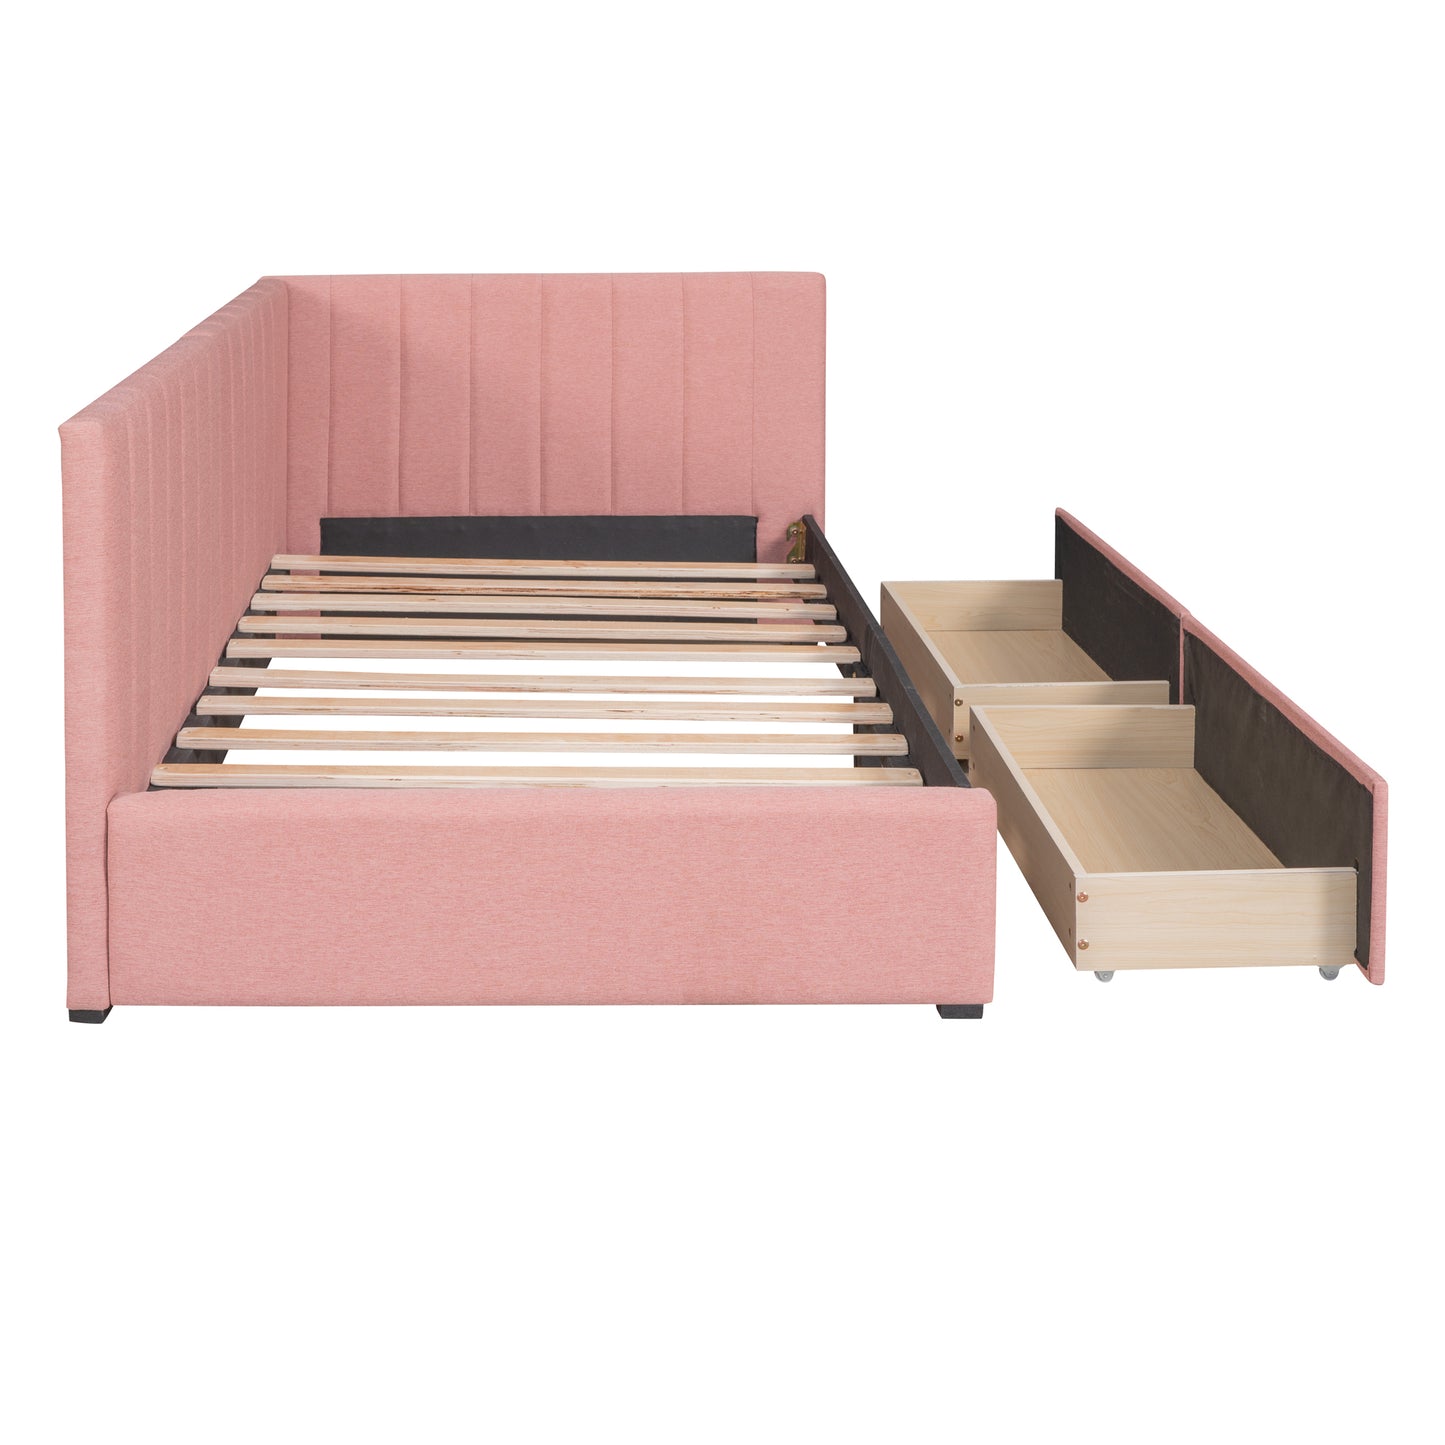 Twin Size Upholstered Daybed with 2 Storage Drawers, Linen Fabric (Pink)